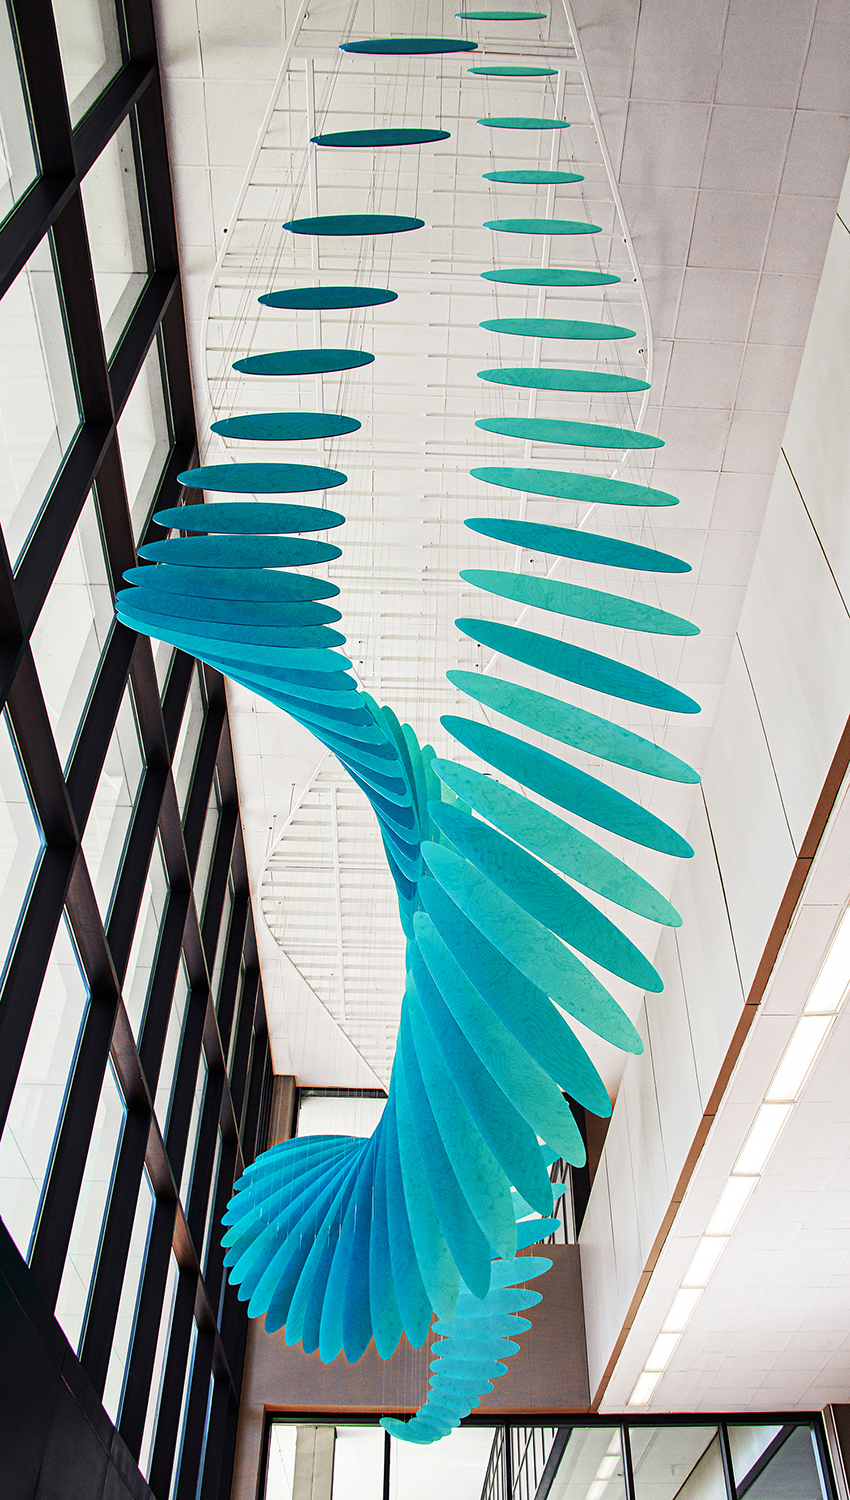 Cleveland State University Science Building – Commissioned Sculpture